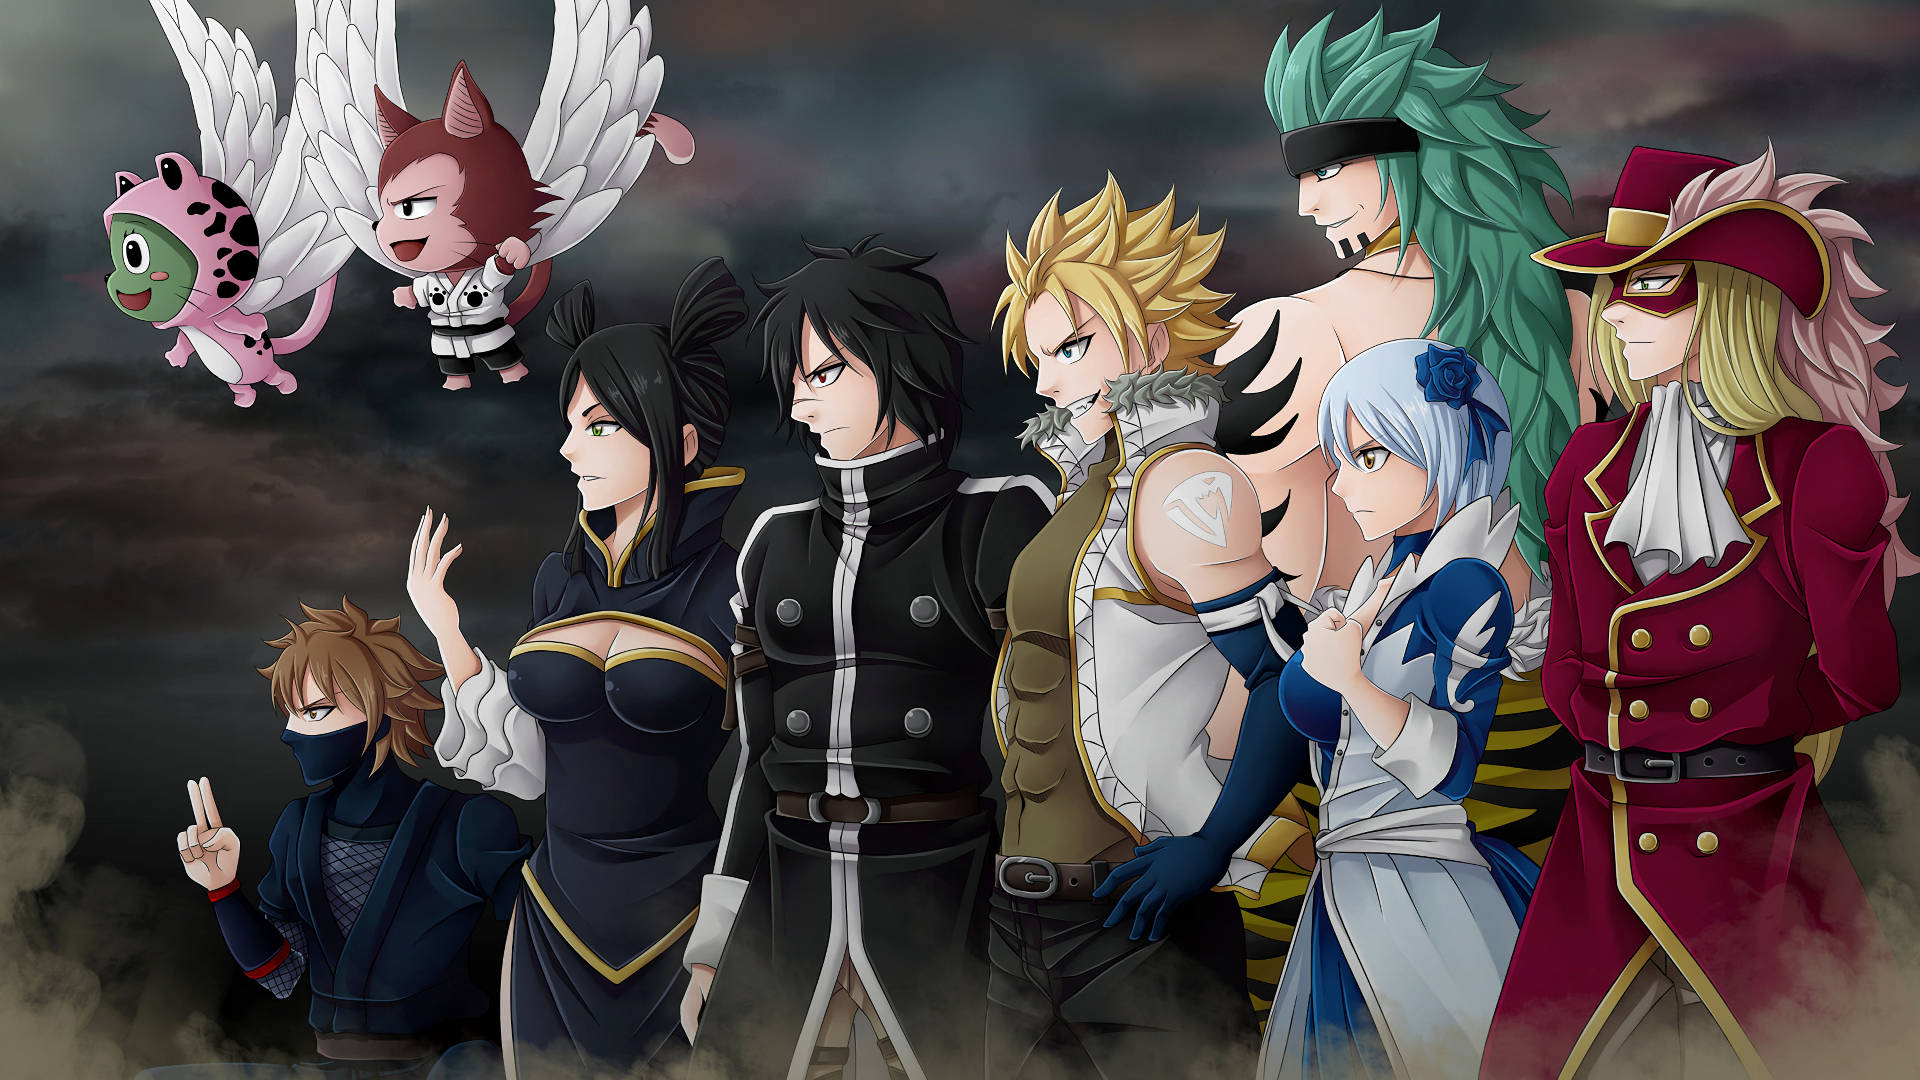 Sting Eucliffe Rogue Cheney Lector Fairy Tail Frosch Fairy Tail Minerva Orland Rufus Lore Orga Nanag 1920x1080